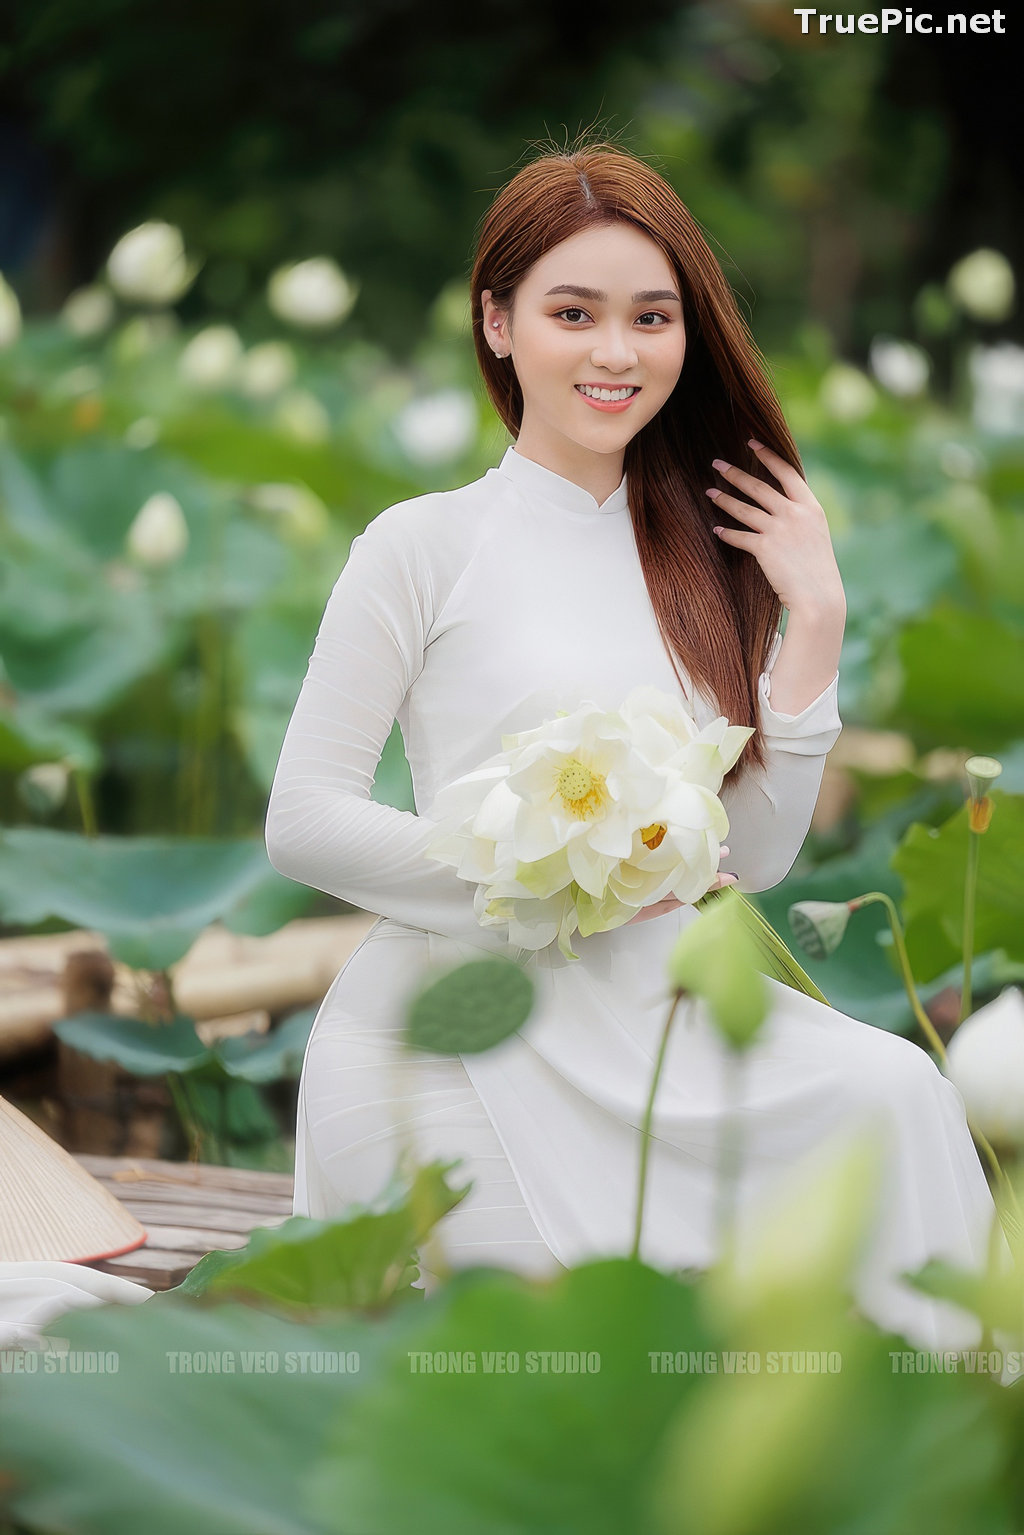 Image Vietnamese Model - Beautiful Girl and Lotus Flower - TruePic.net (56 pictures) - Picture-31